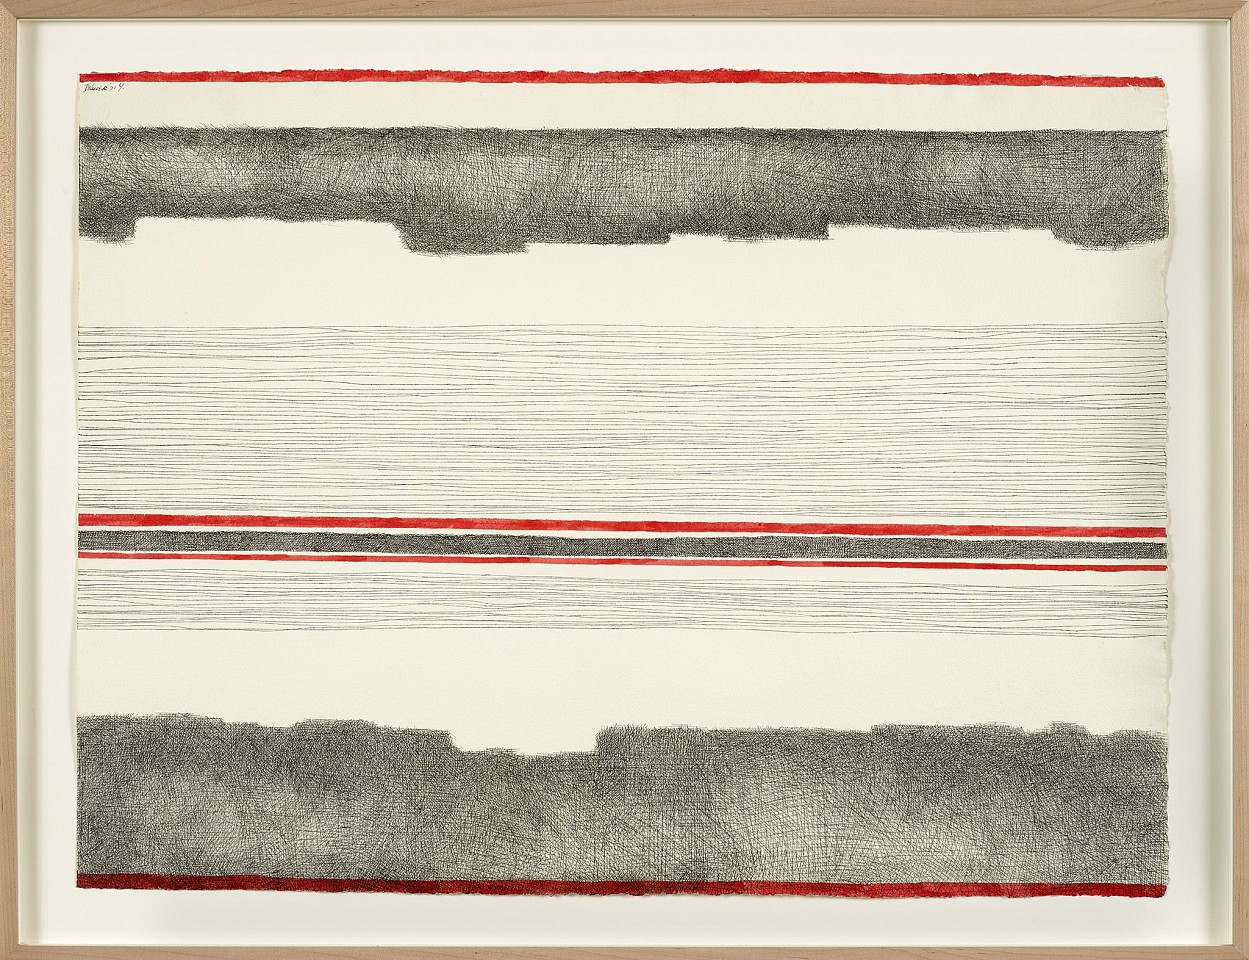 Dorothy Dehner, Mirage Series, 1971
Pen and ink, pencil on paper, 22 3/4 x 31 1/2 in. (57.8 x 80 cm)
DEH-00009